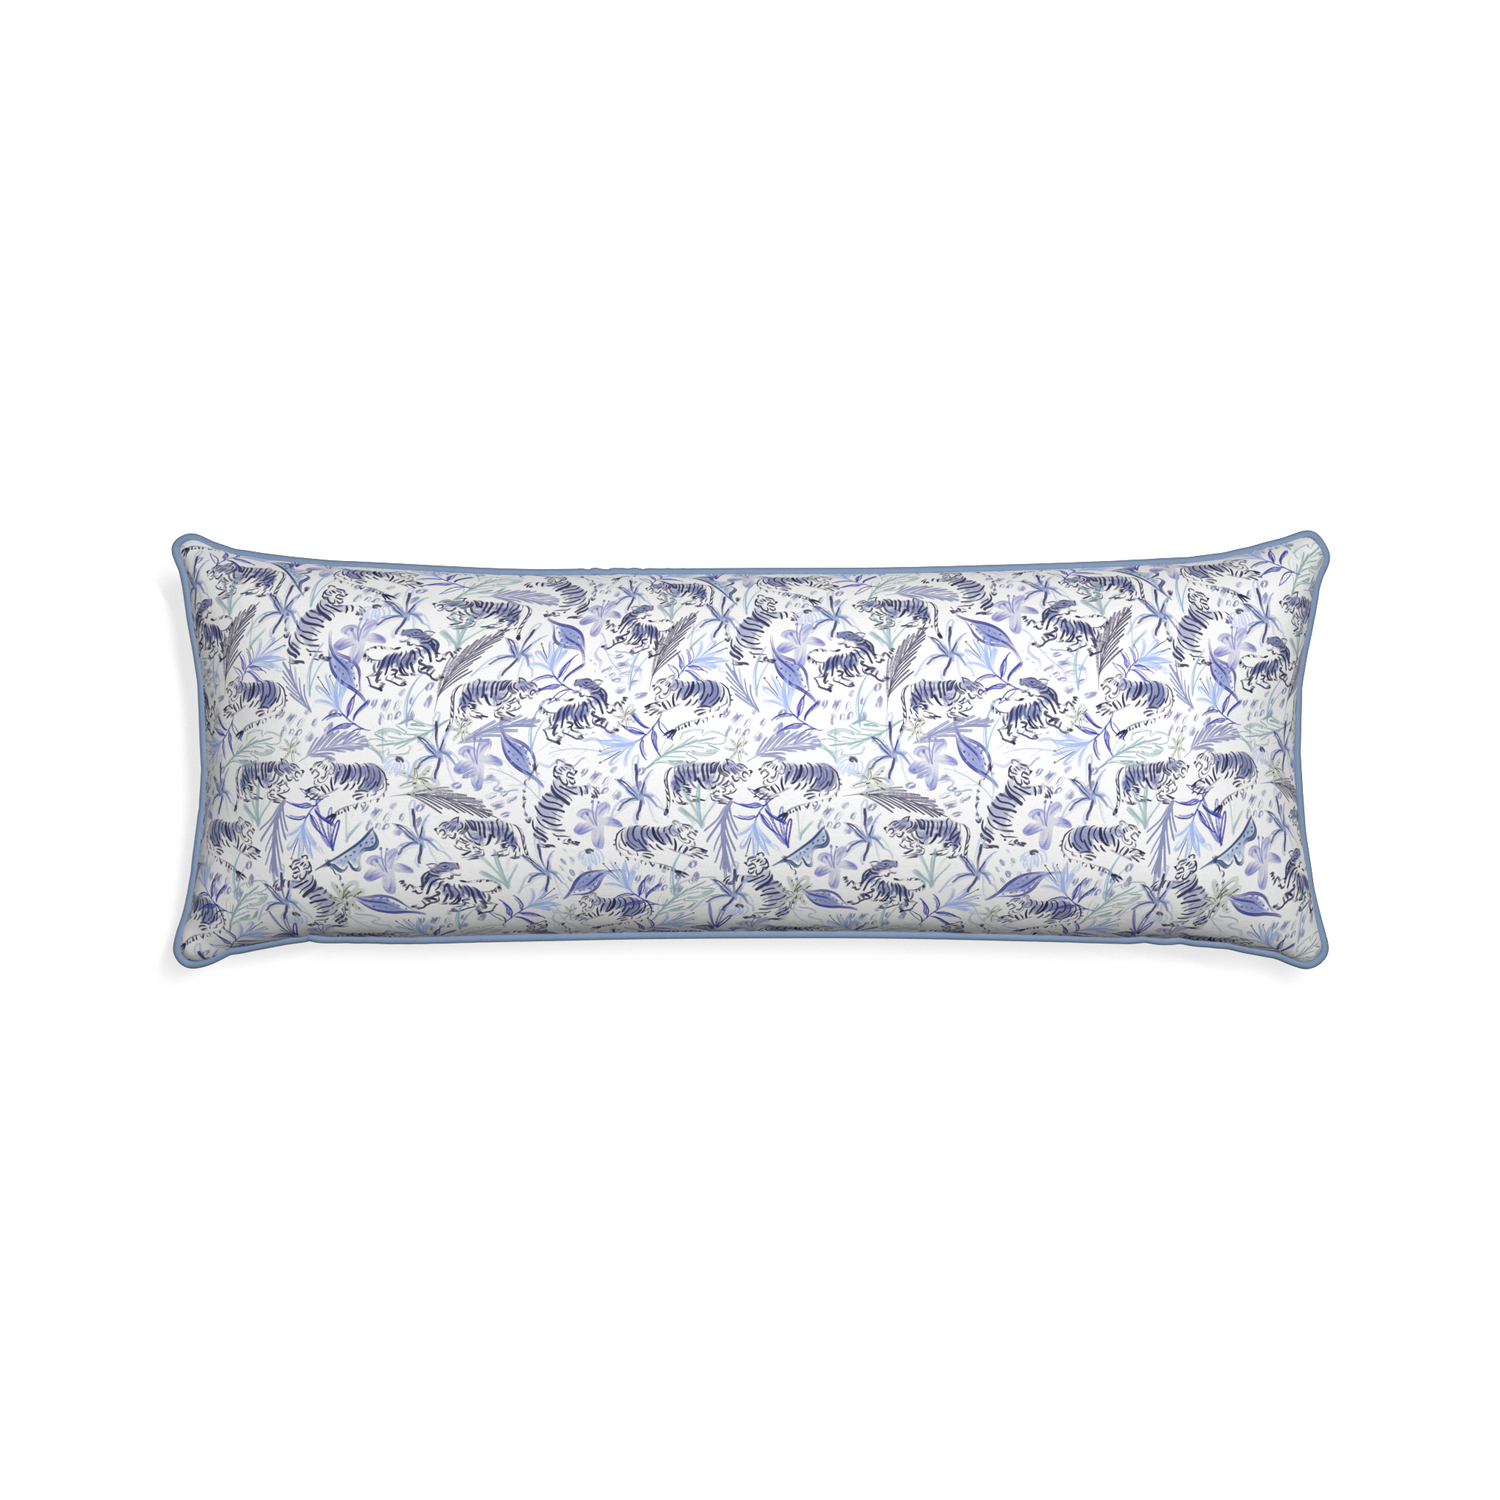 Xl-lumbar frida blue custom blue with intricate tiger designpillow with sky piping on white background